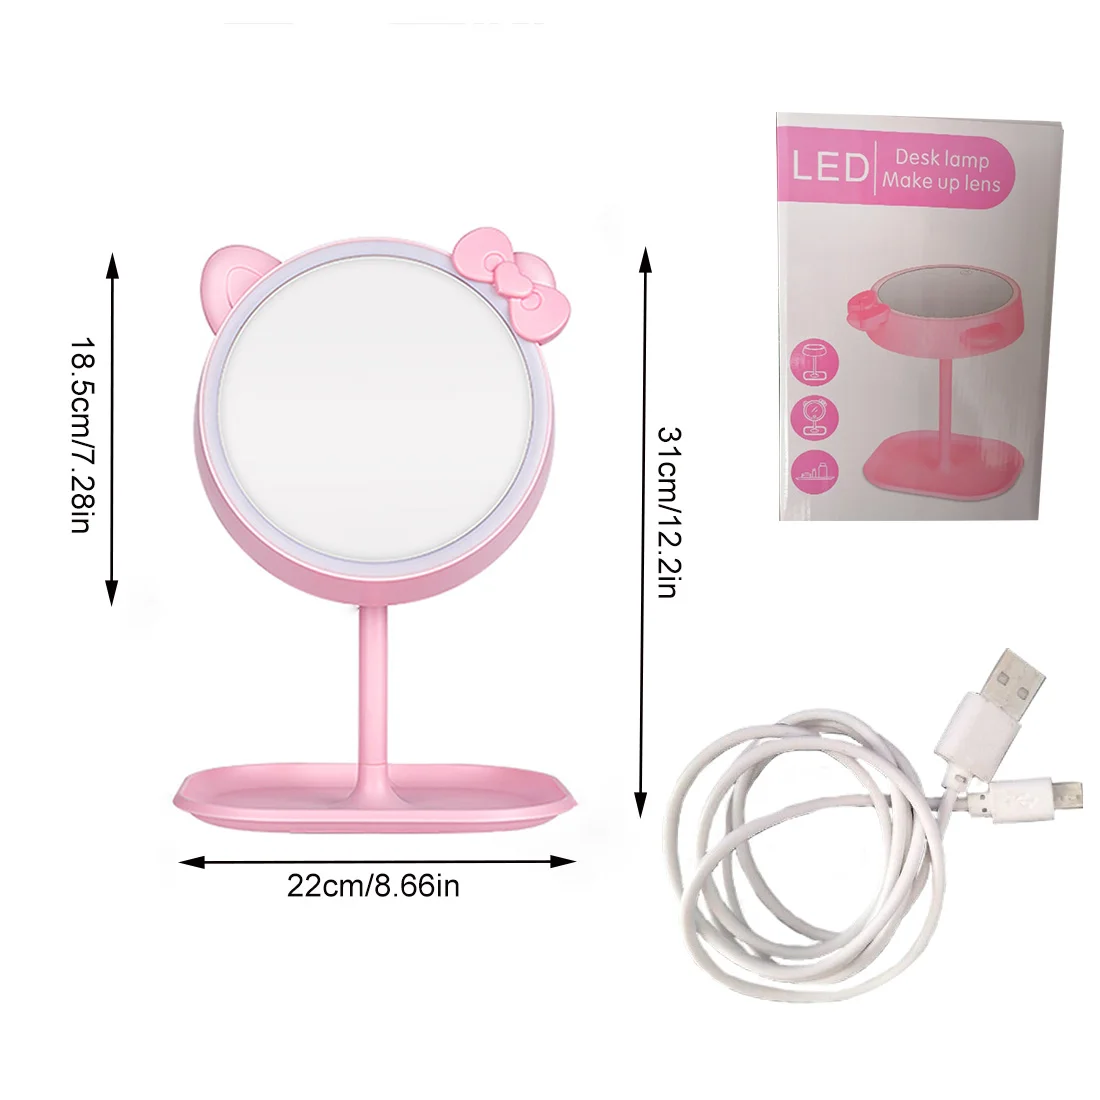 TSHOU511 cat Ear Makeup Mirror With LED Adjustable Light Touch Screen USB LED Make Up Mirror Desk Vanity Cosmetic Storage Mirror images - 6